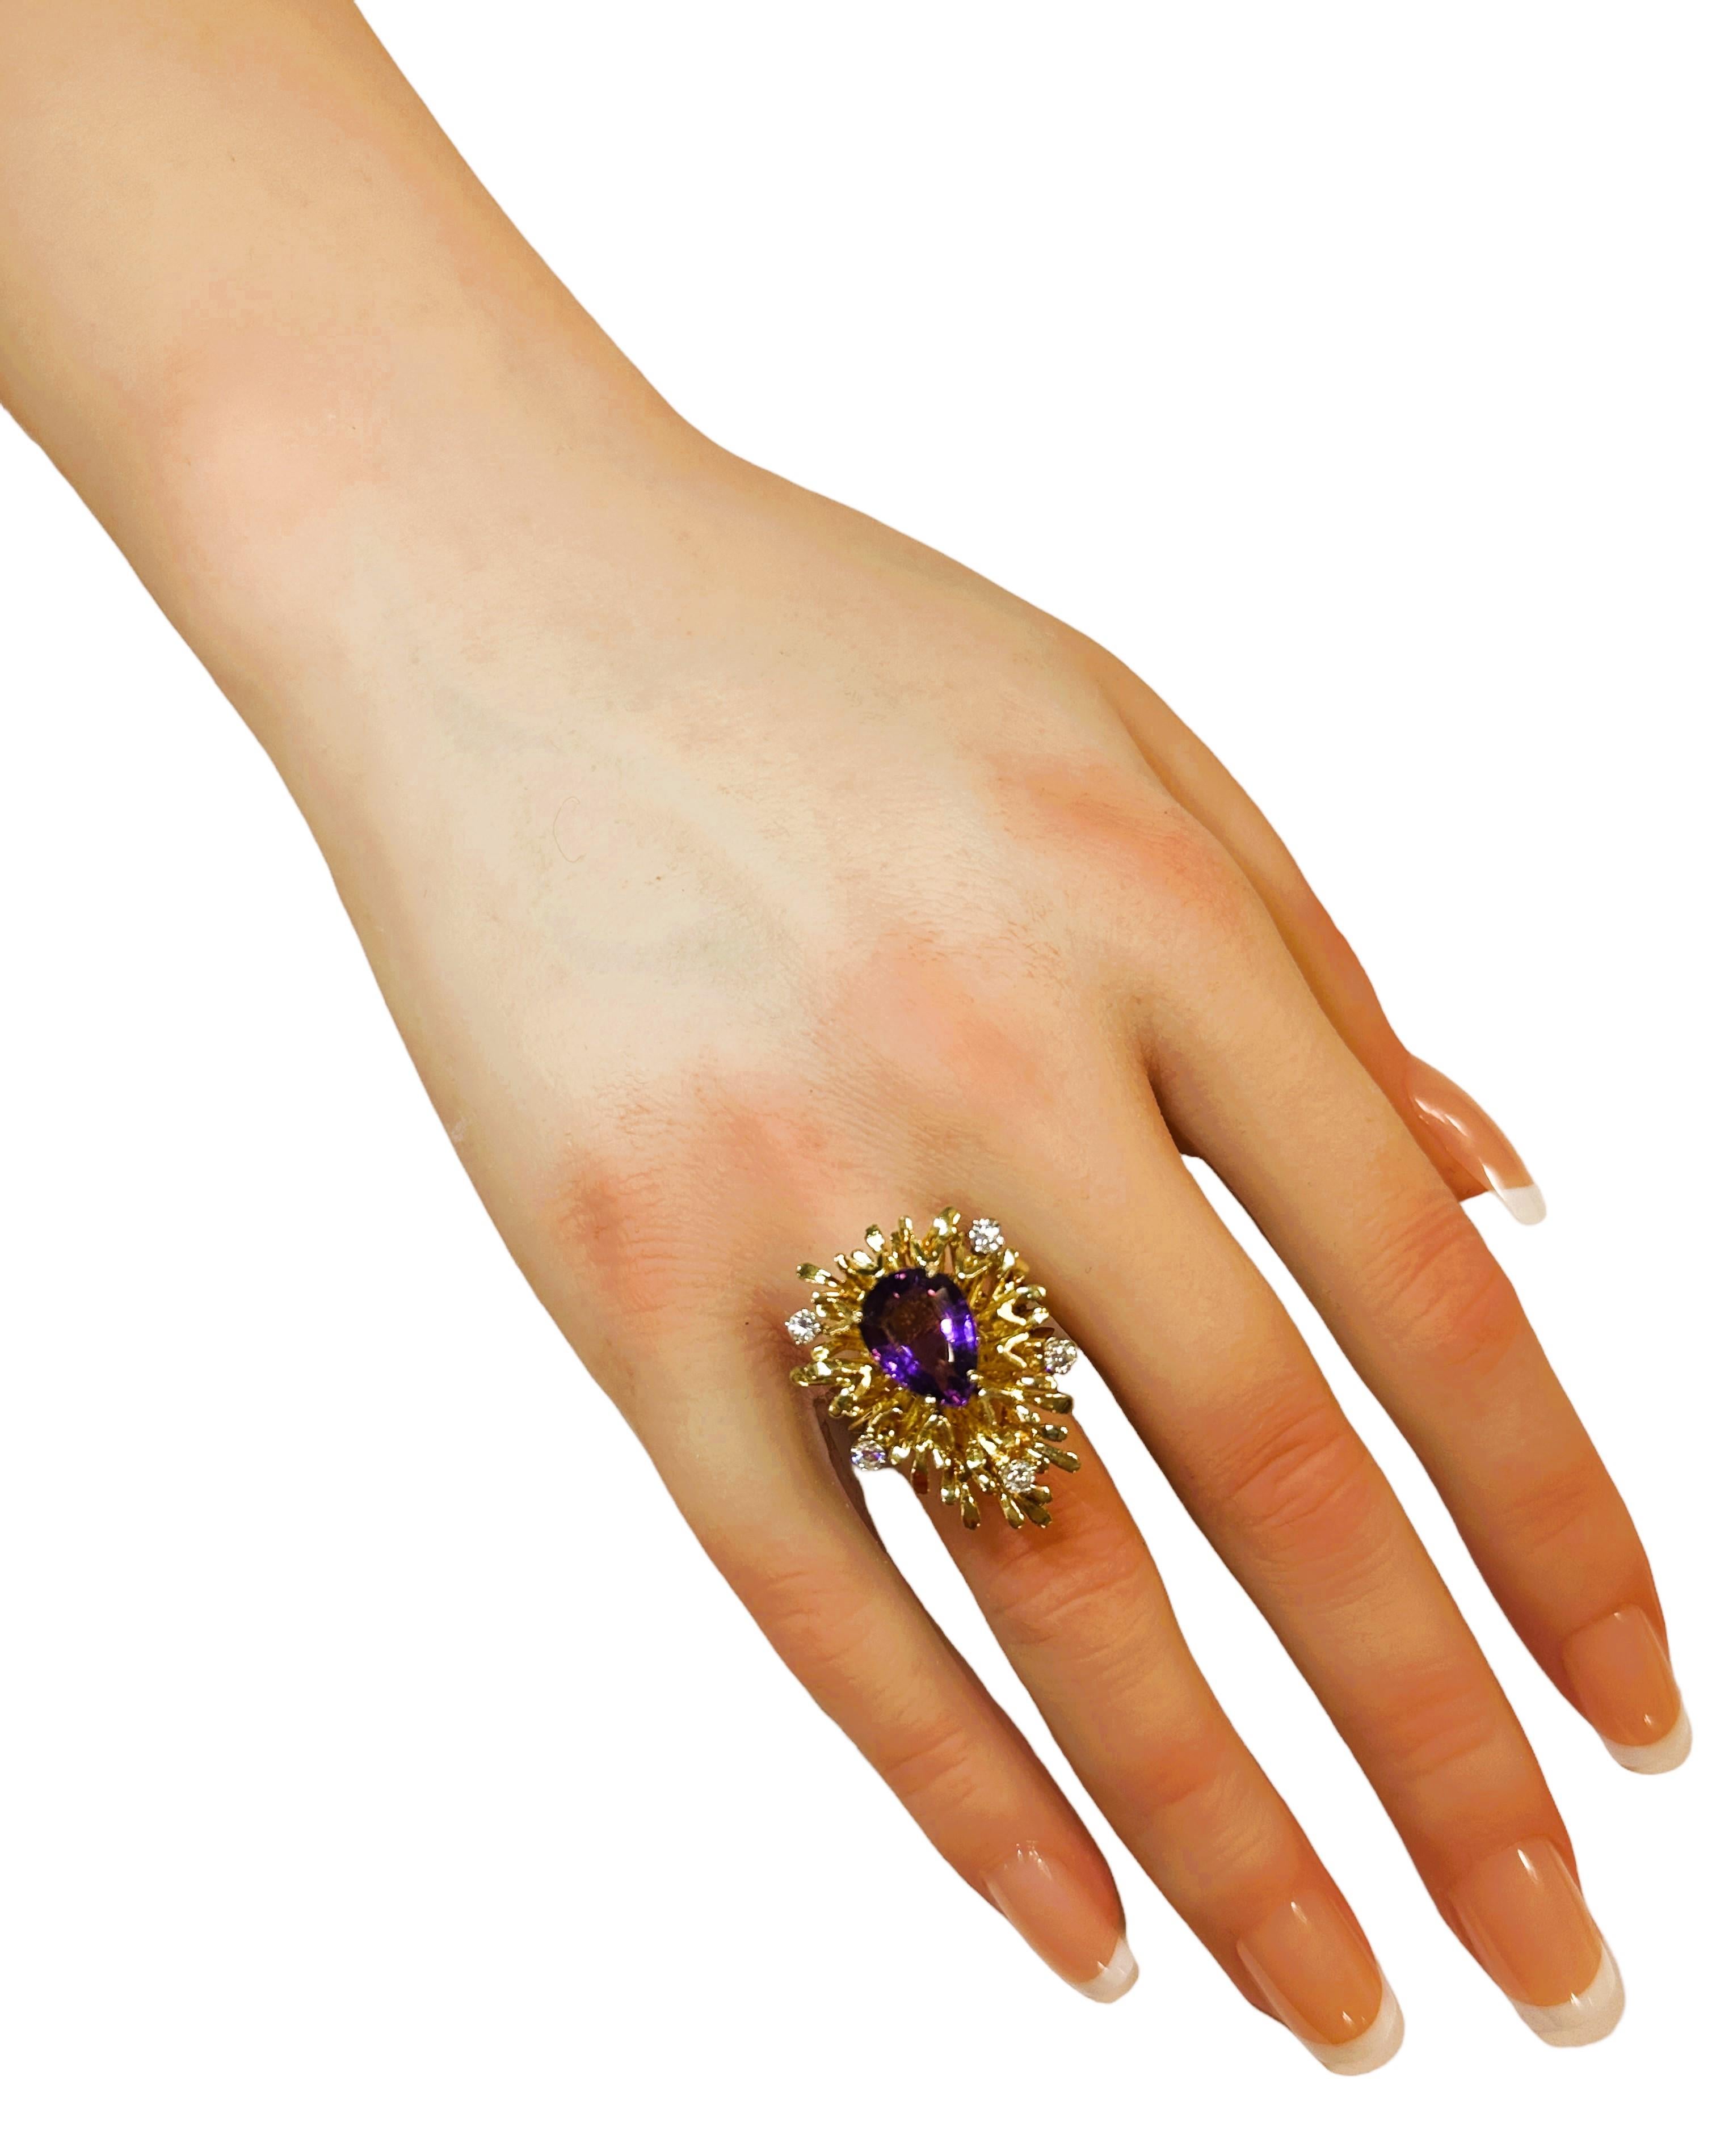 18K YG 4 Ct Amethyst & .25 Ct Diamond Ring Size 7.25 with Appraisal For Sale 1